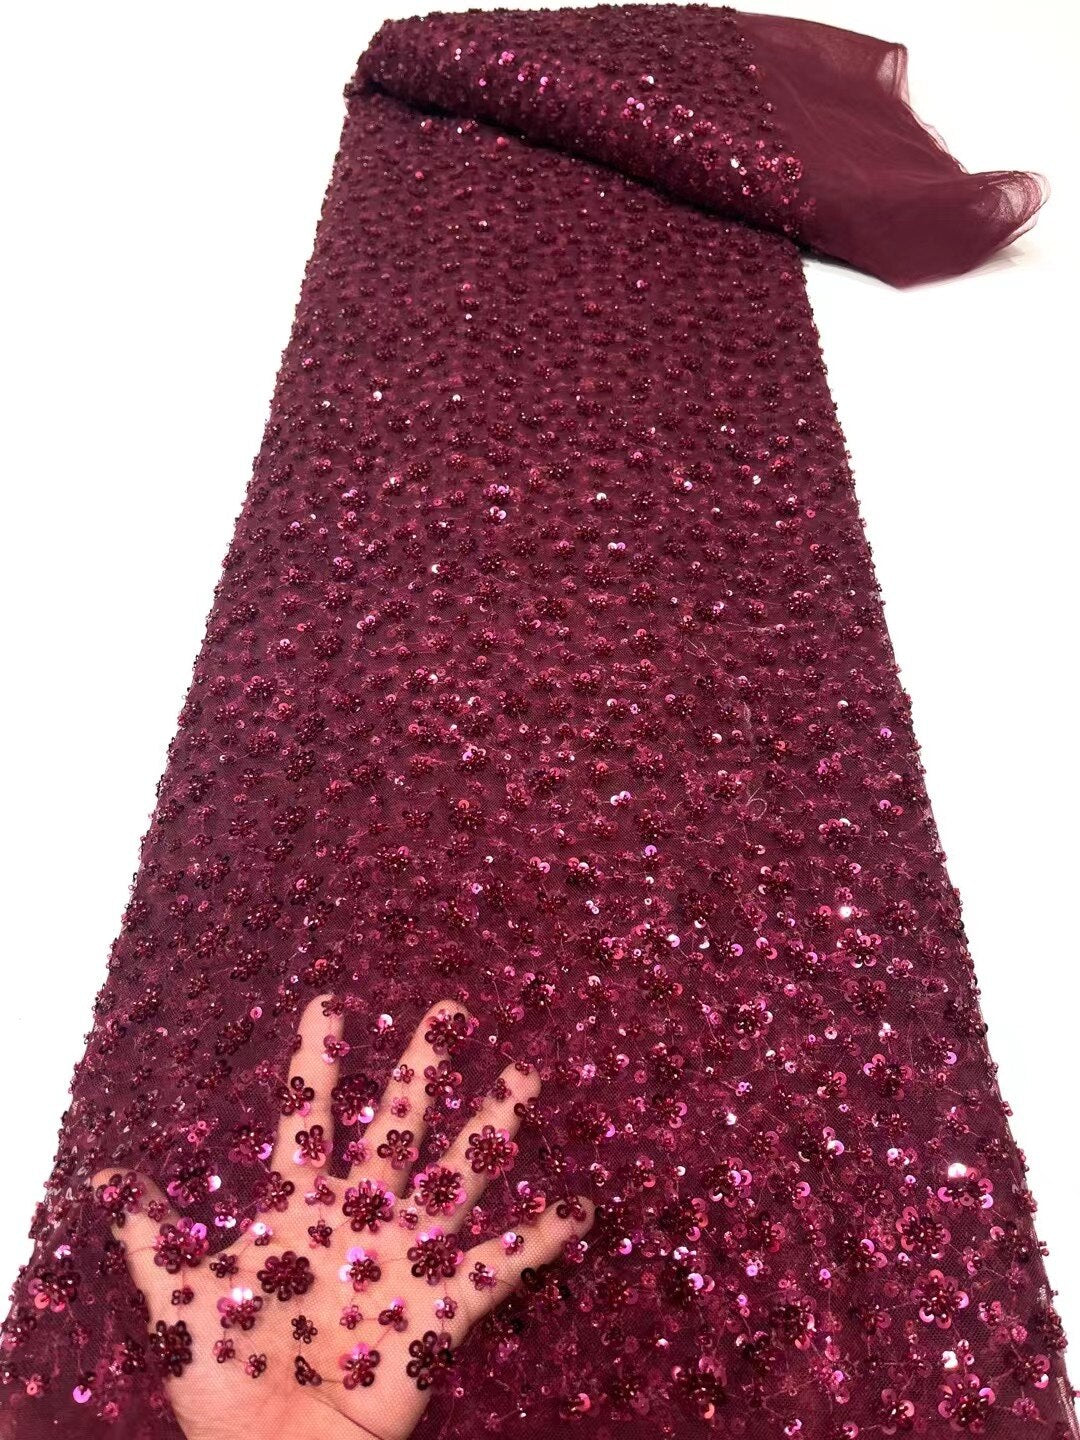 5 YARDS / 10 COLORS / Evan Sequin Beaded Embroidery Glitter Mesh Sparkly Lace Wedding Party Dress Fabric